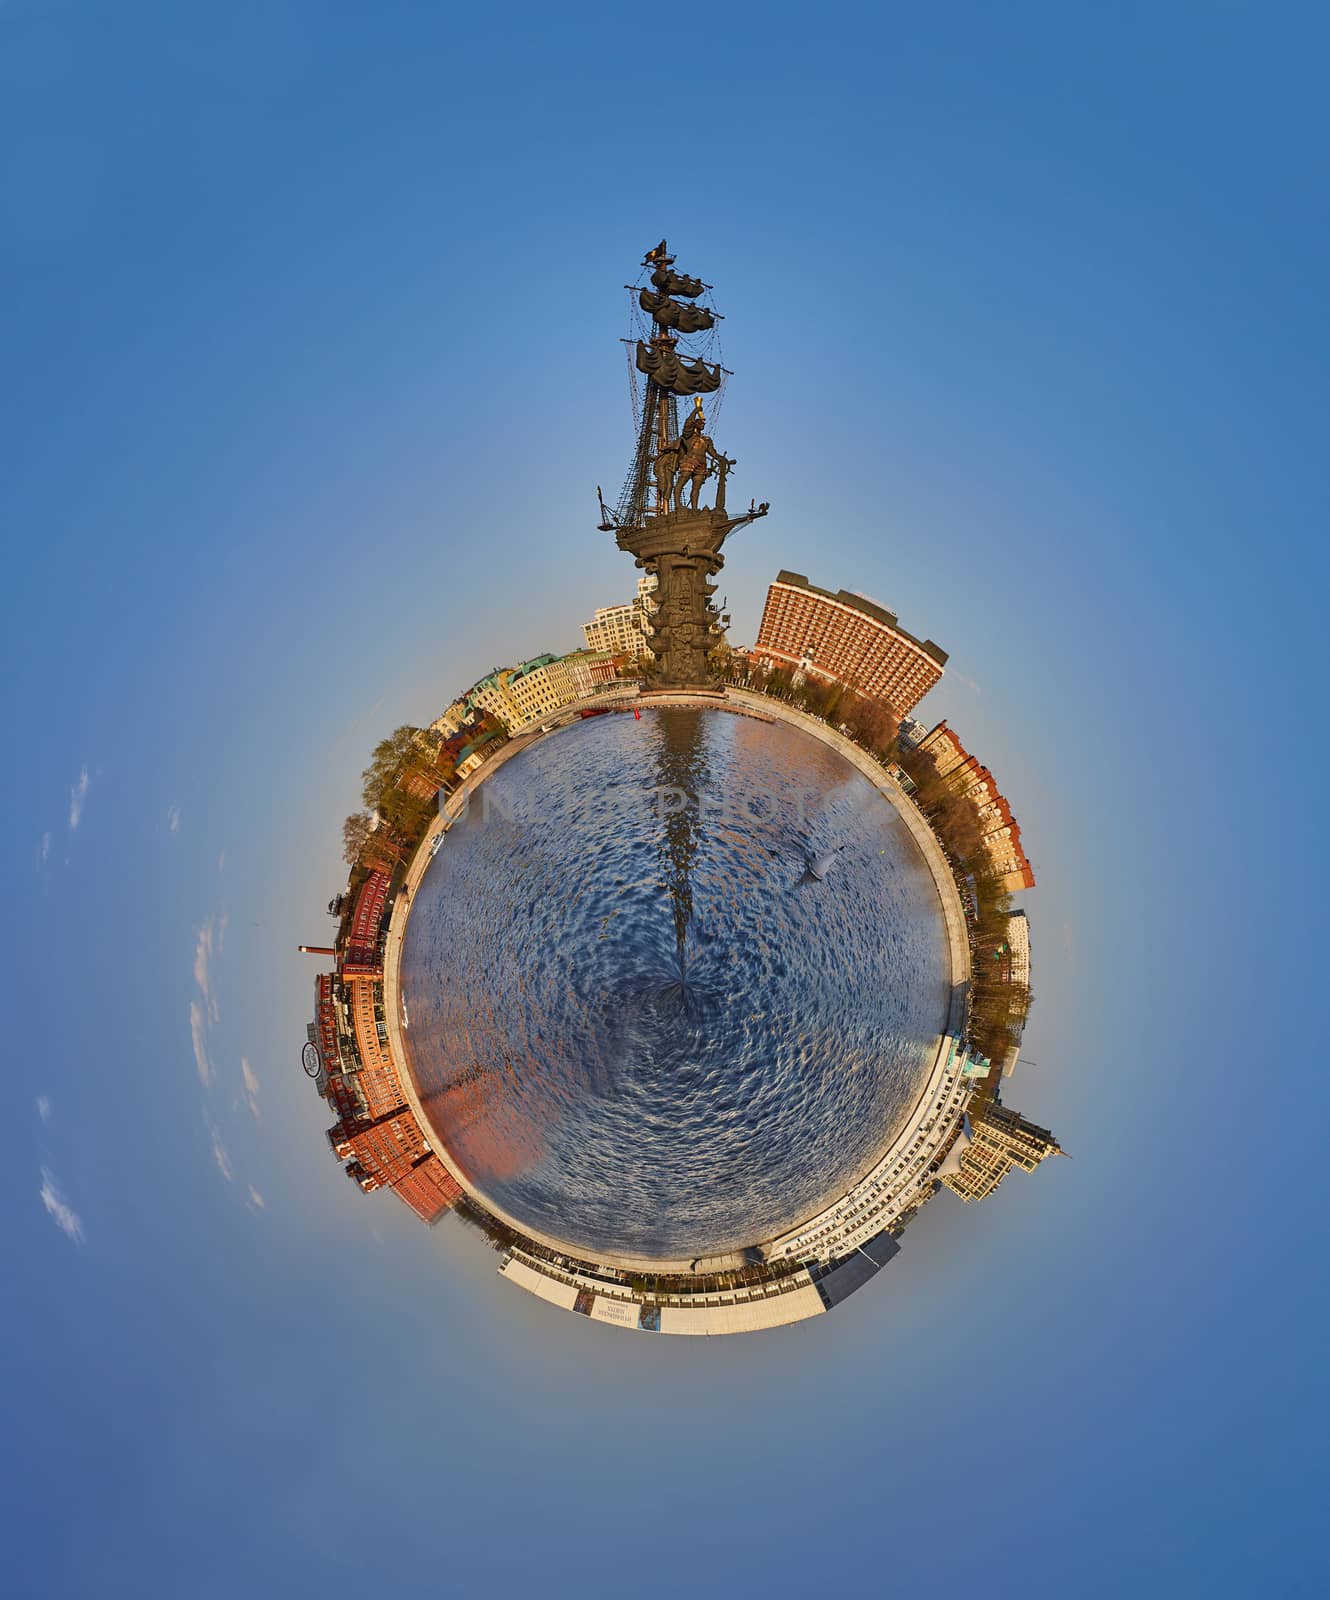 Small planet - Moscow river with Peter the great monument by rasika108